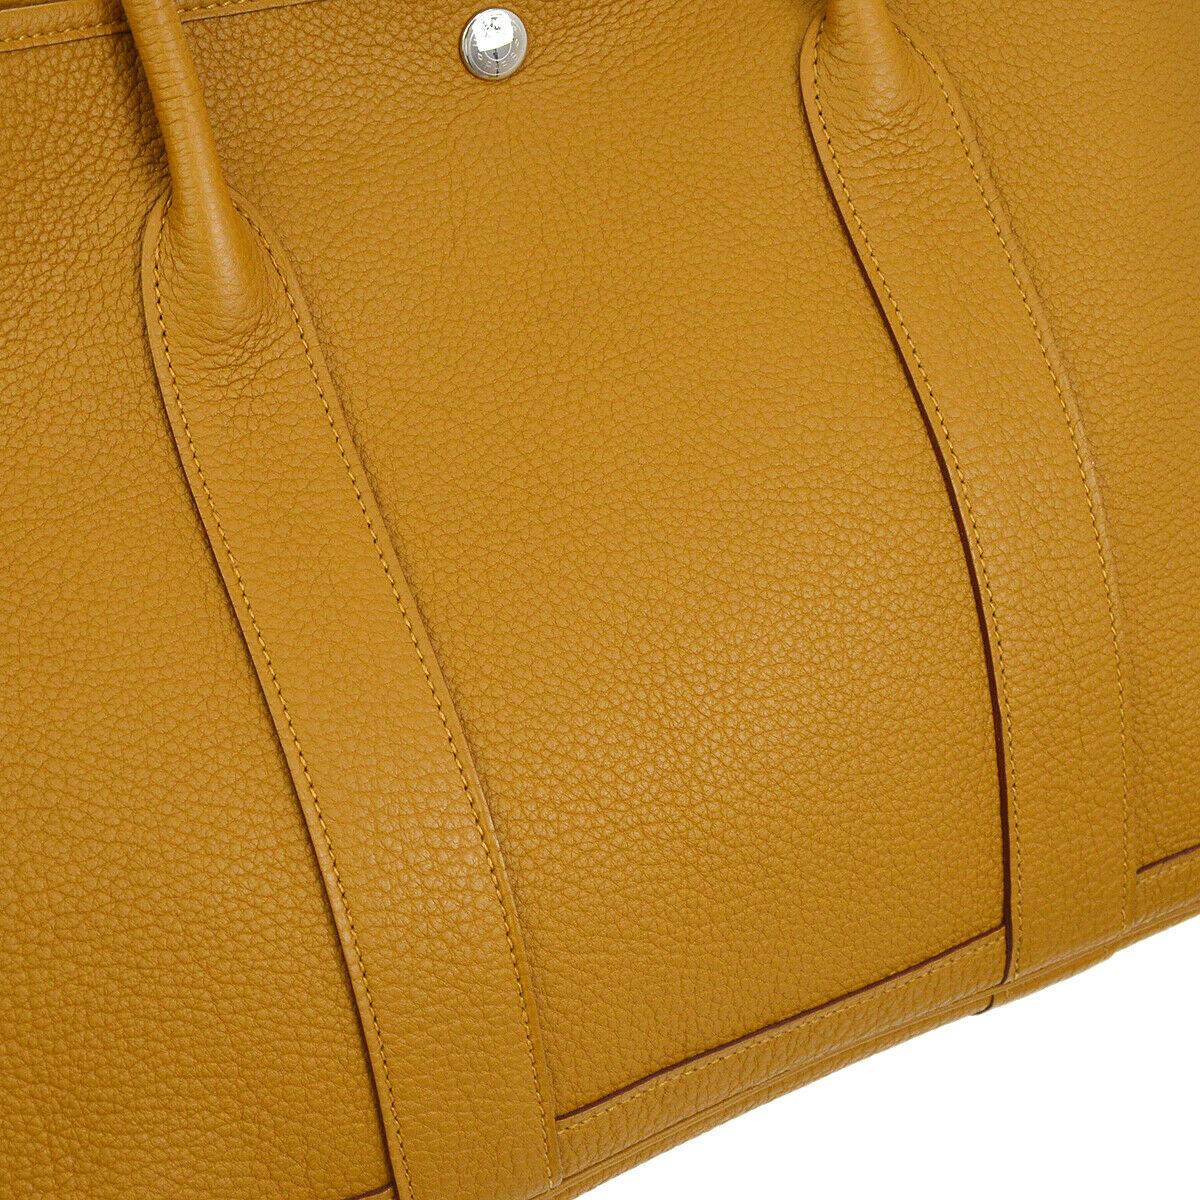 Hermes Mustard Leather Large Carryall Travel Garden Top Handle Satchel Tote Bag

Leather
Palladium hardware
Snap button closure
Leather and woven lining
Made in France
Handle drop 6